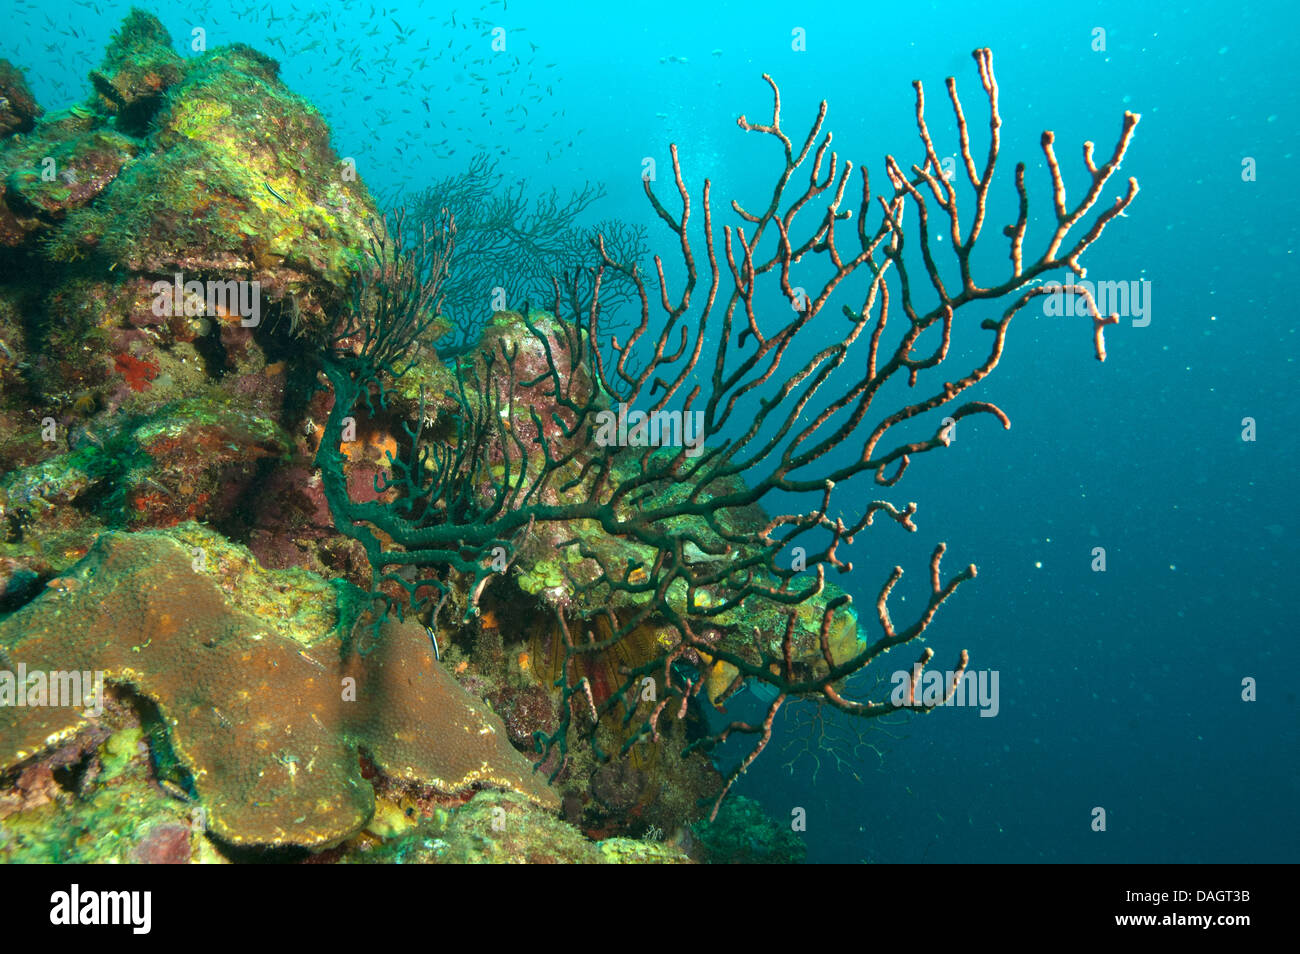 Coral in the Caribbean Sea, St Lucia Stock Photo